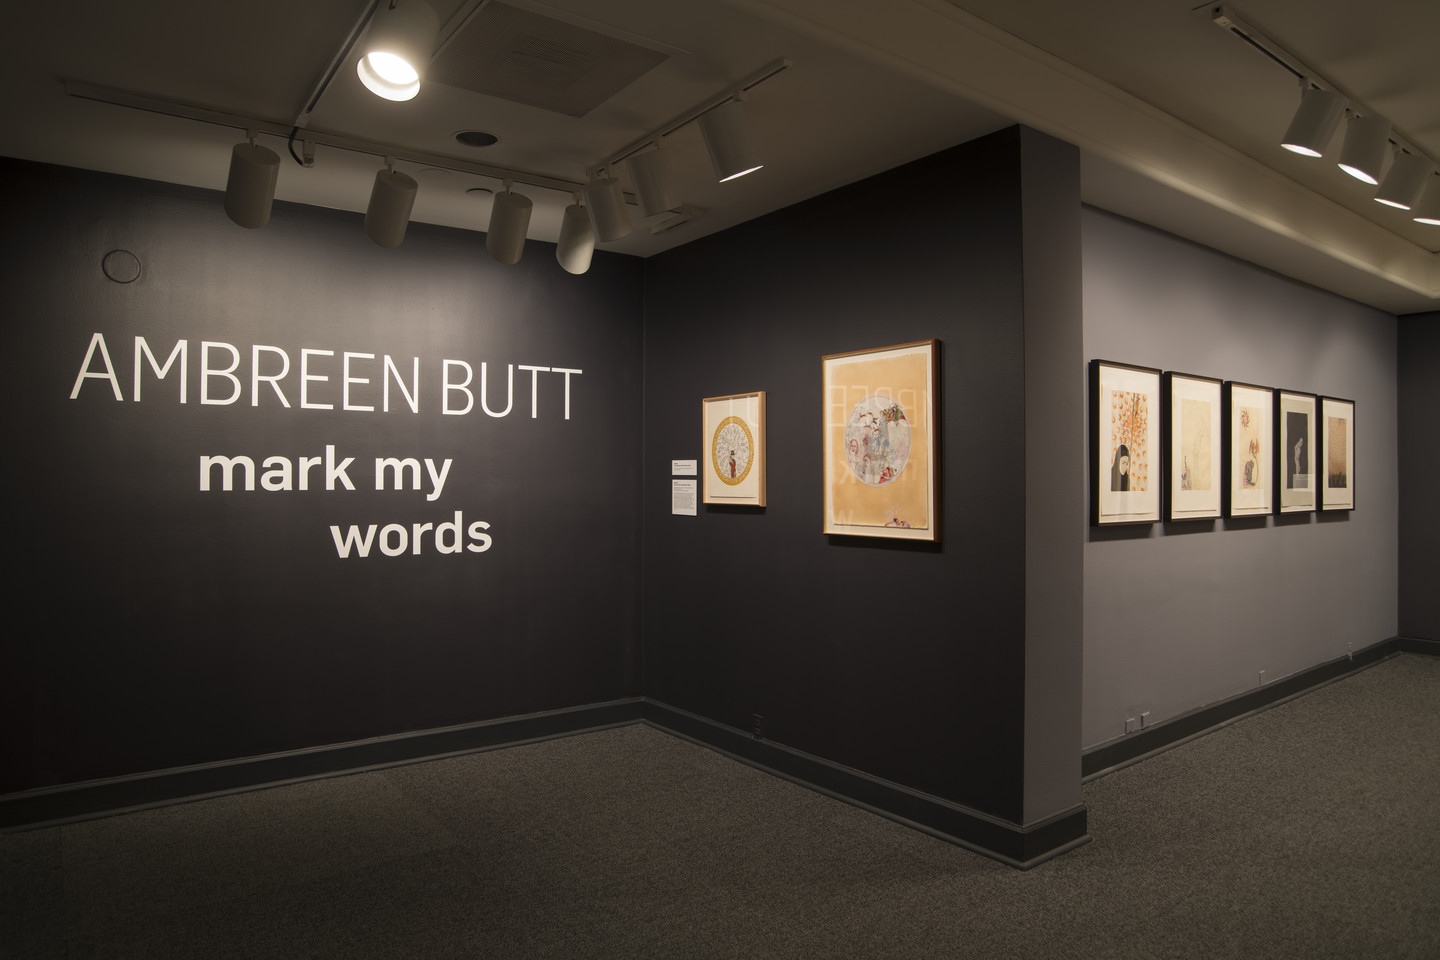 Installation view of seven works by Ambreen Butt on dark gray walls. The words 